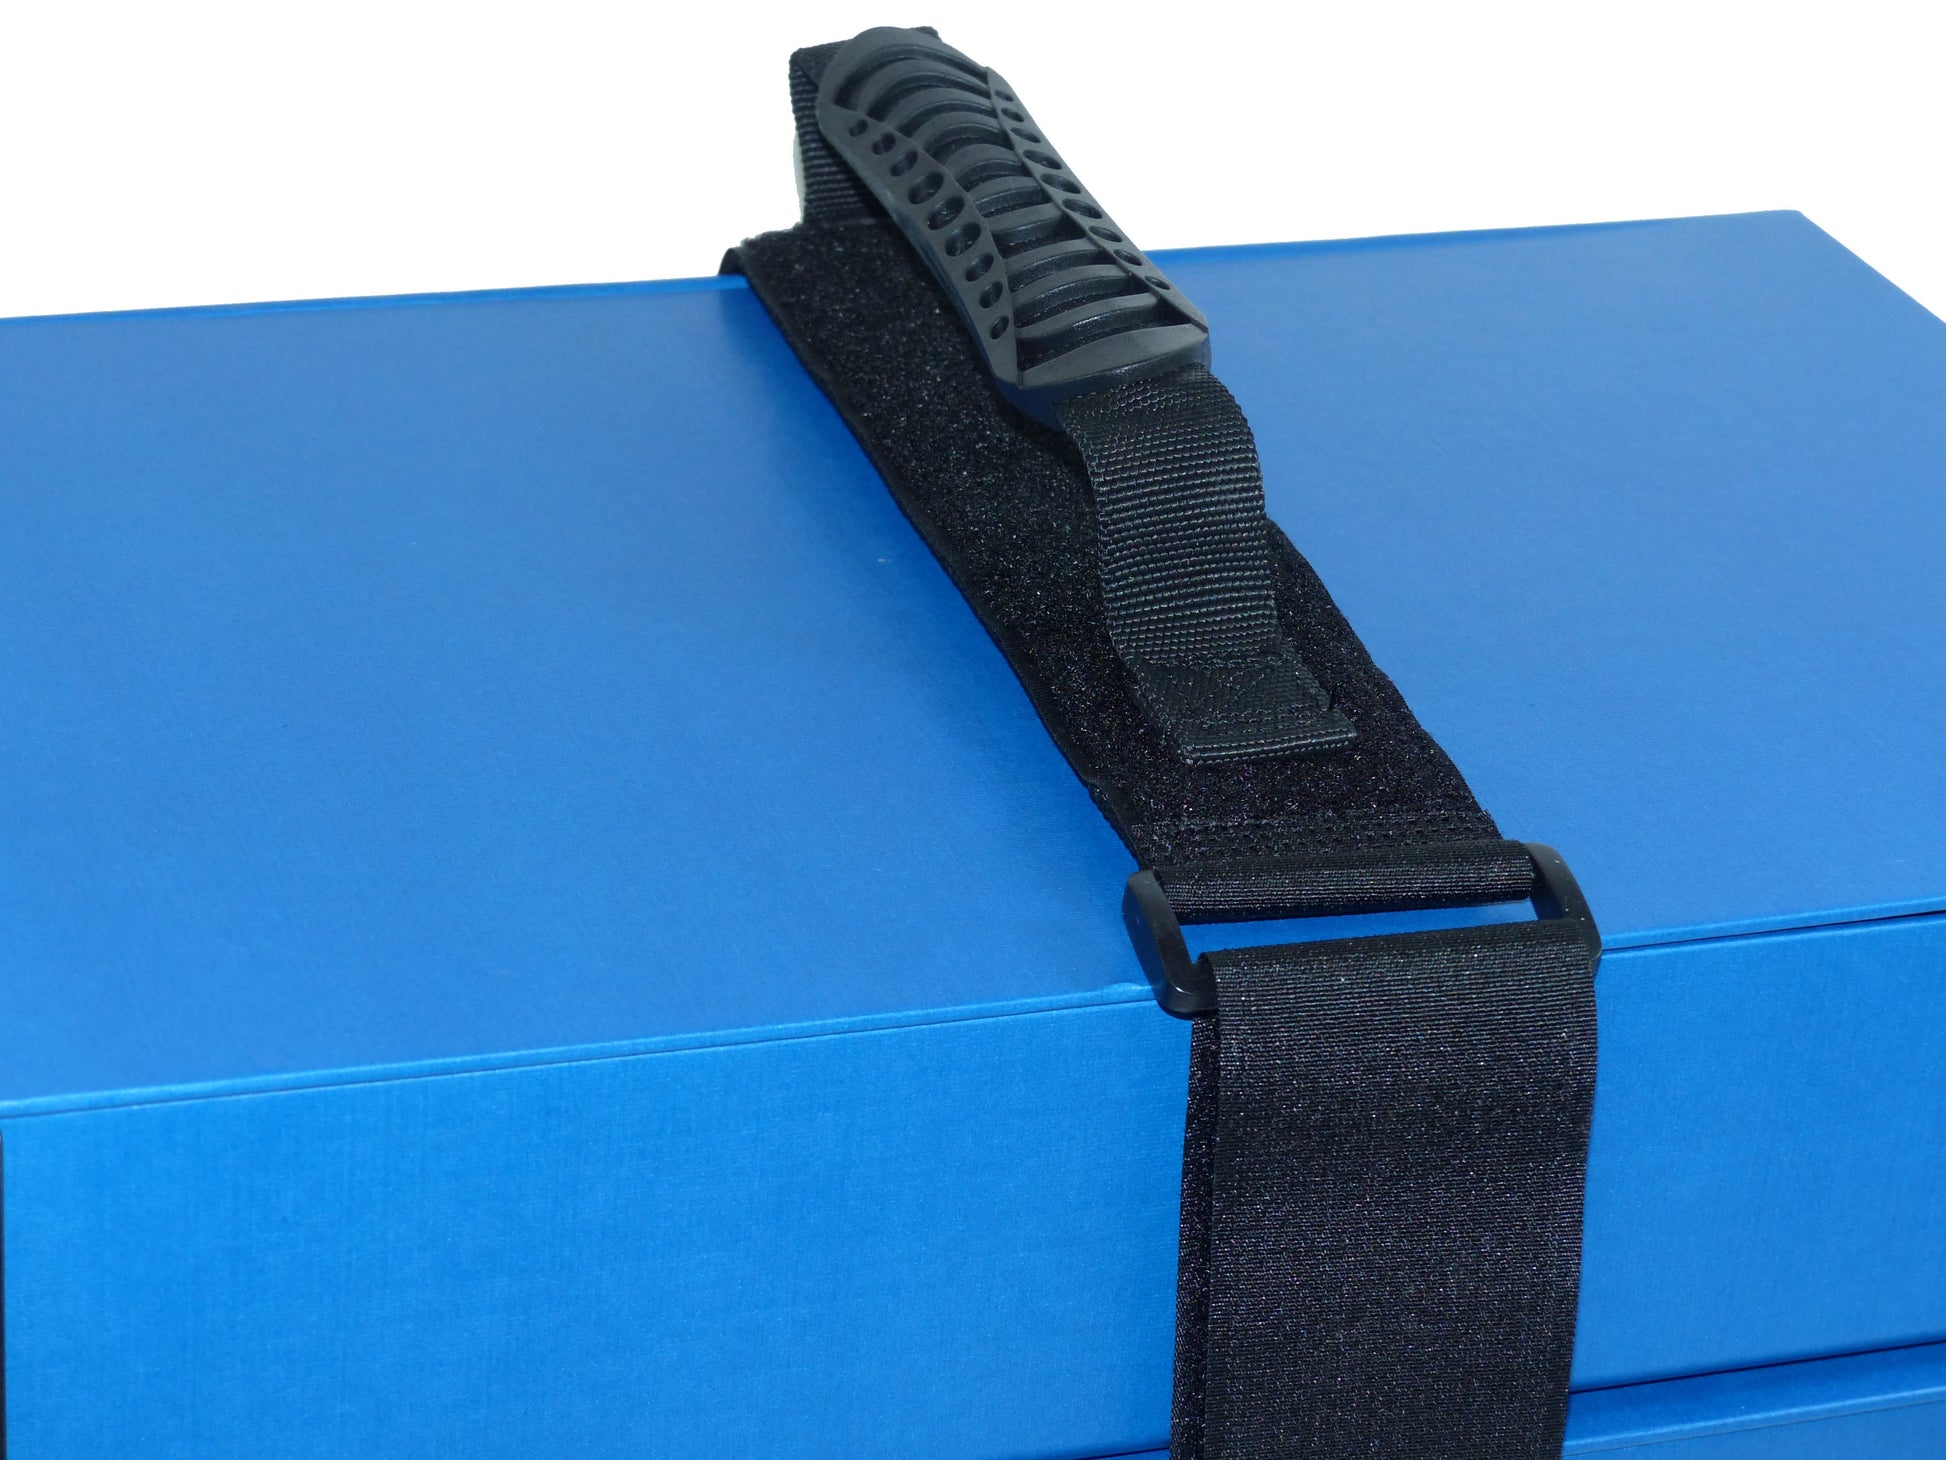 Benristraps 50mm Hook and Loop Cinch Strap with Carry Handle, 150cm on box